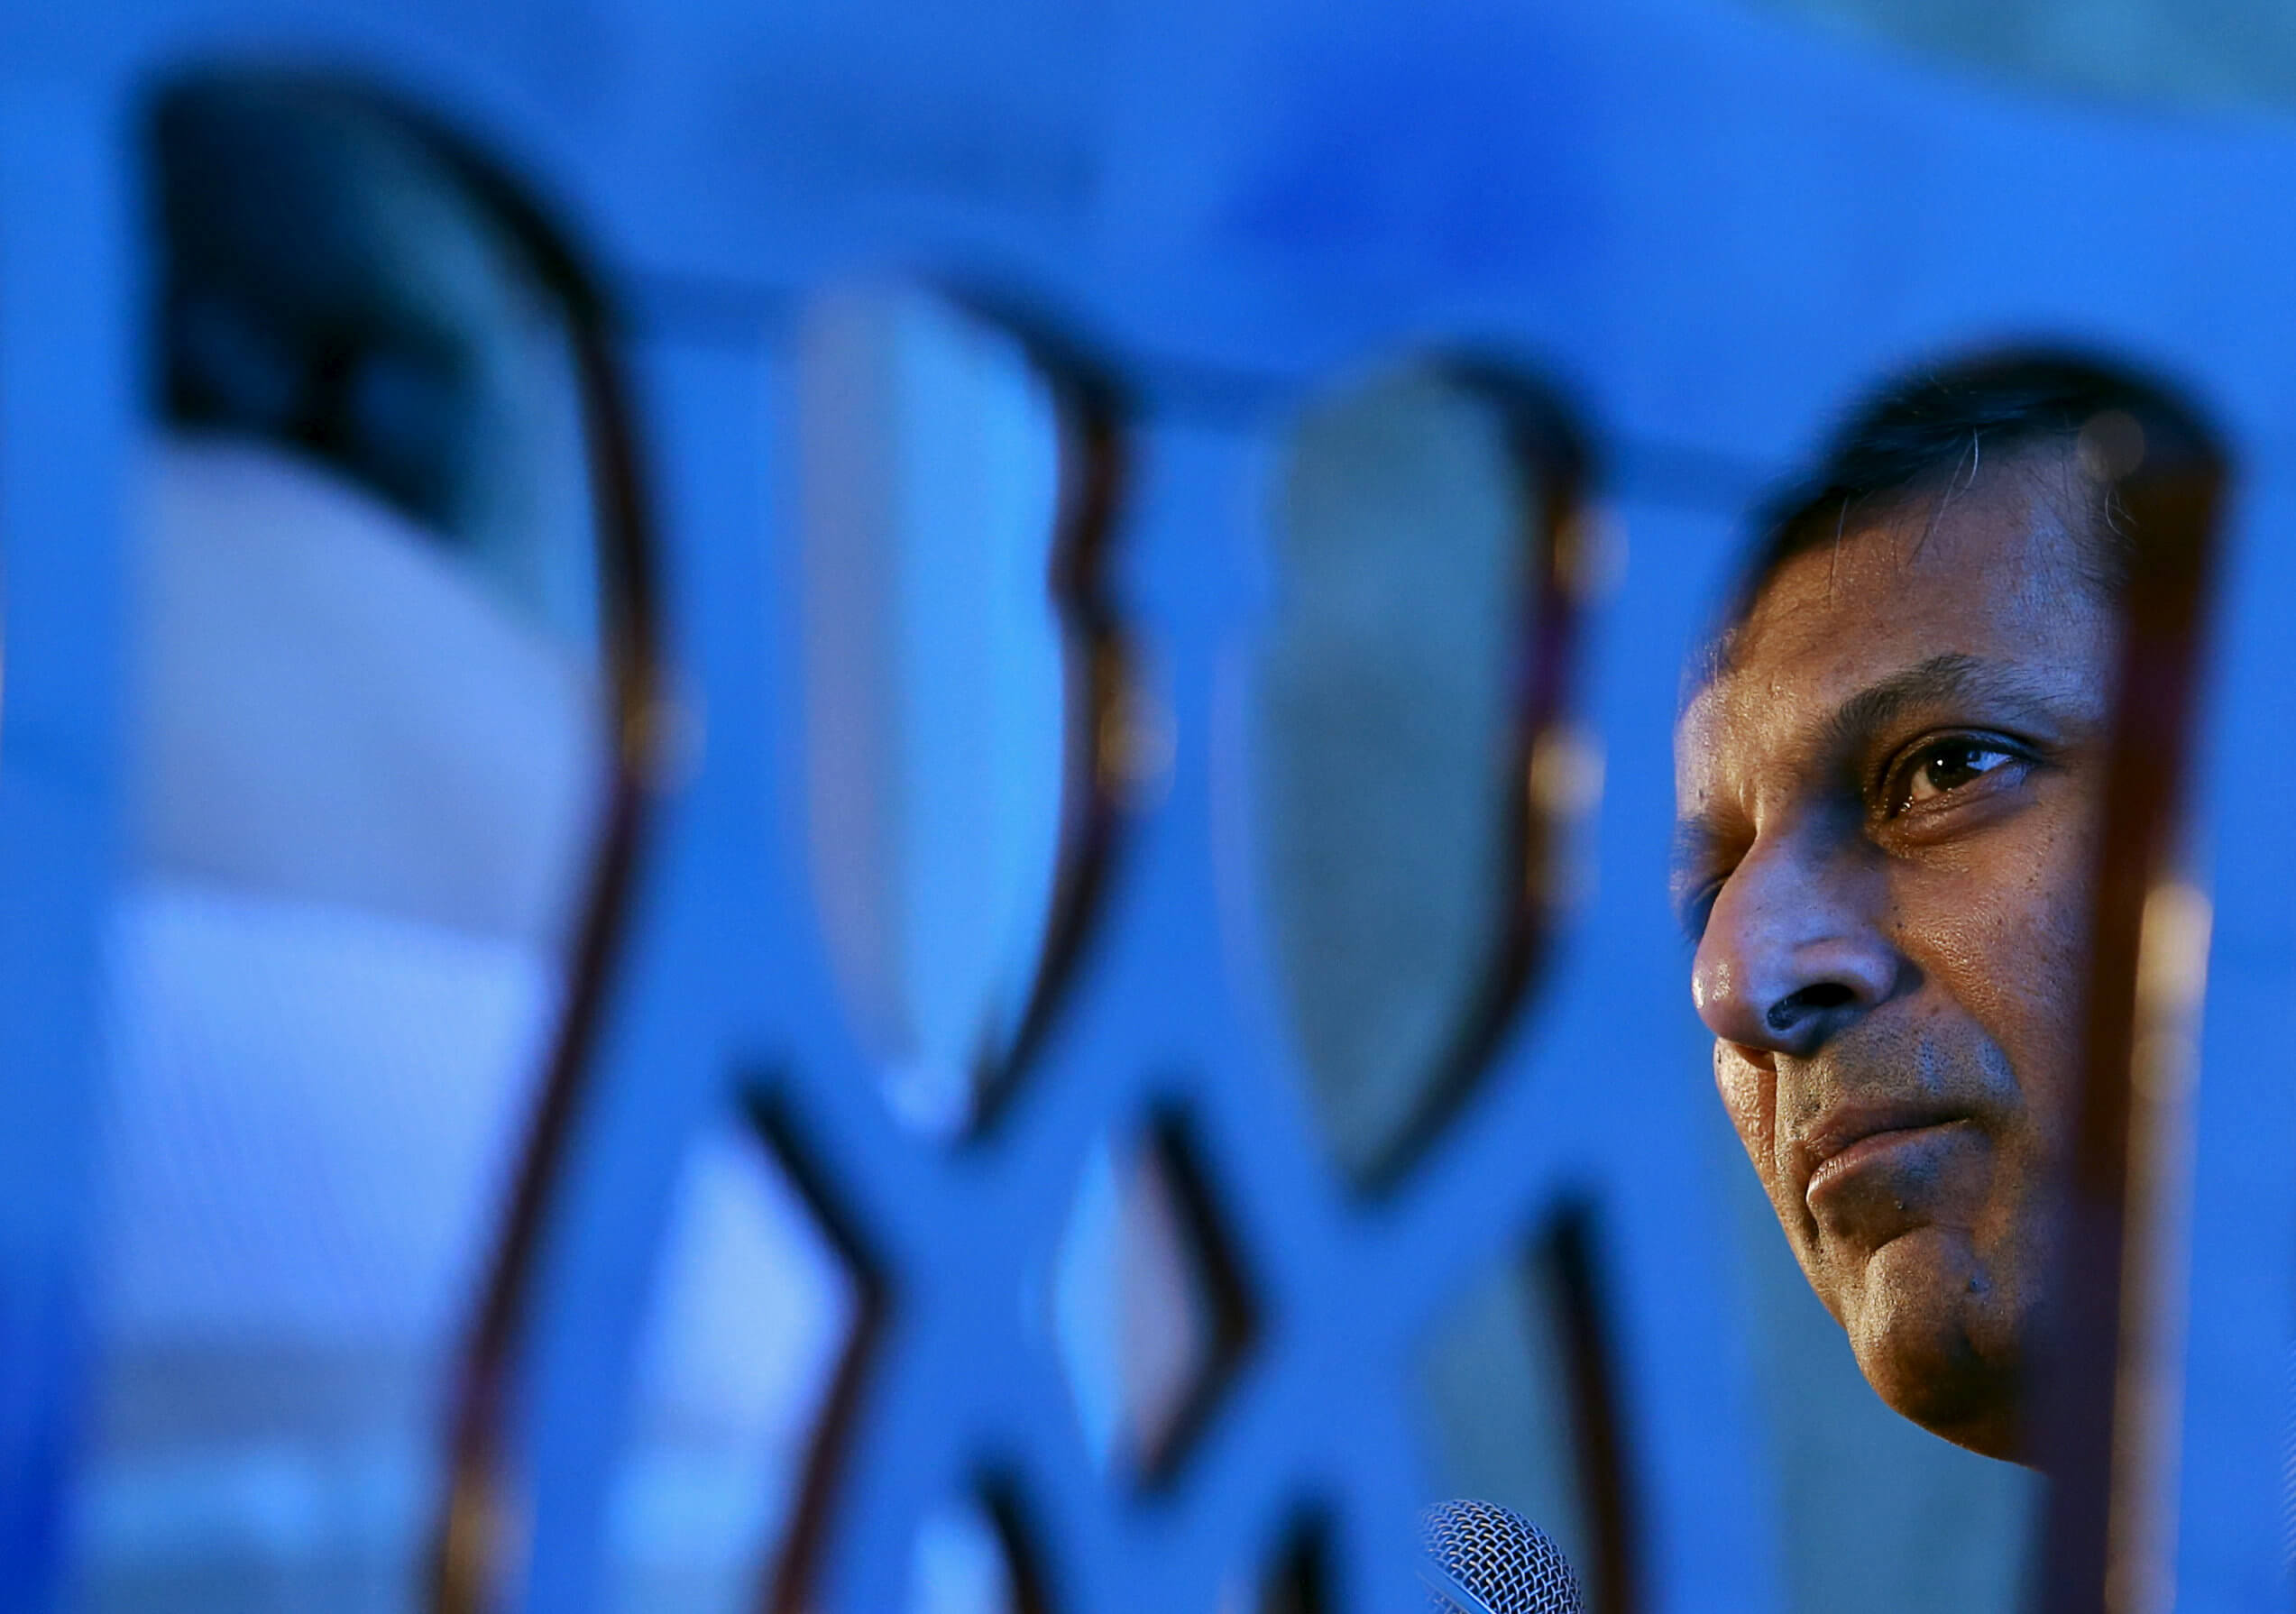 Reserve Bank of India (RBI) Governor Raghuram Rajan attends an industry event in Mumbai, India, August 20, 2015. REUTERS/Danish Siddiqui/File Photo